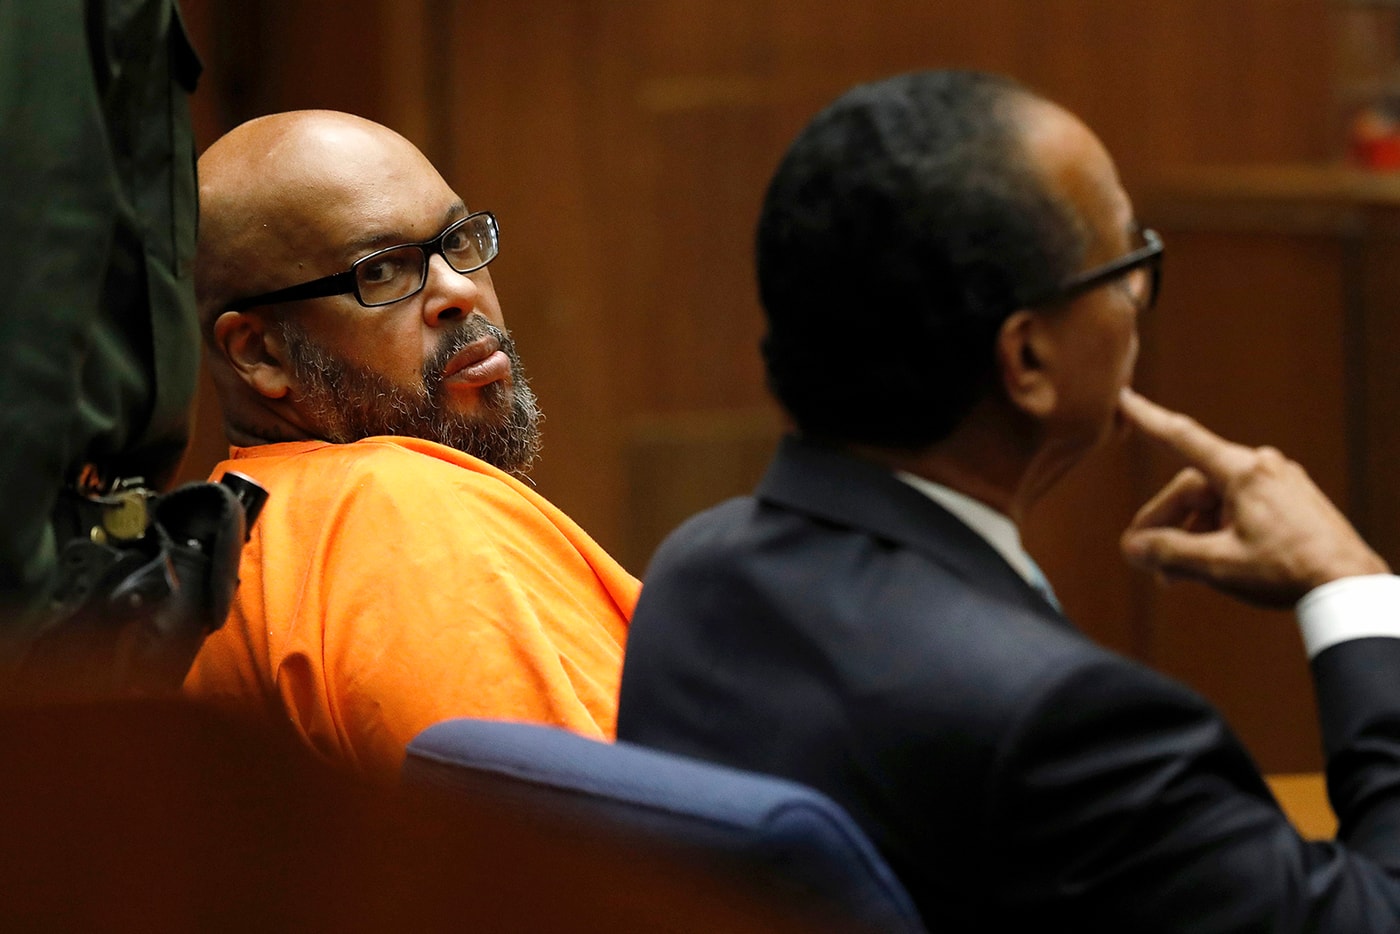 Suge Knight Faces 28 Year Prison Sentence Deadly Hit and Run